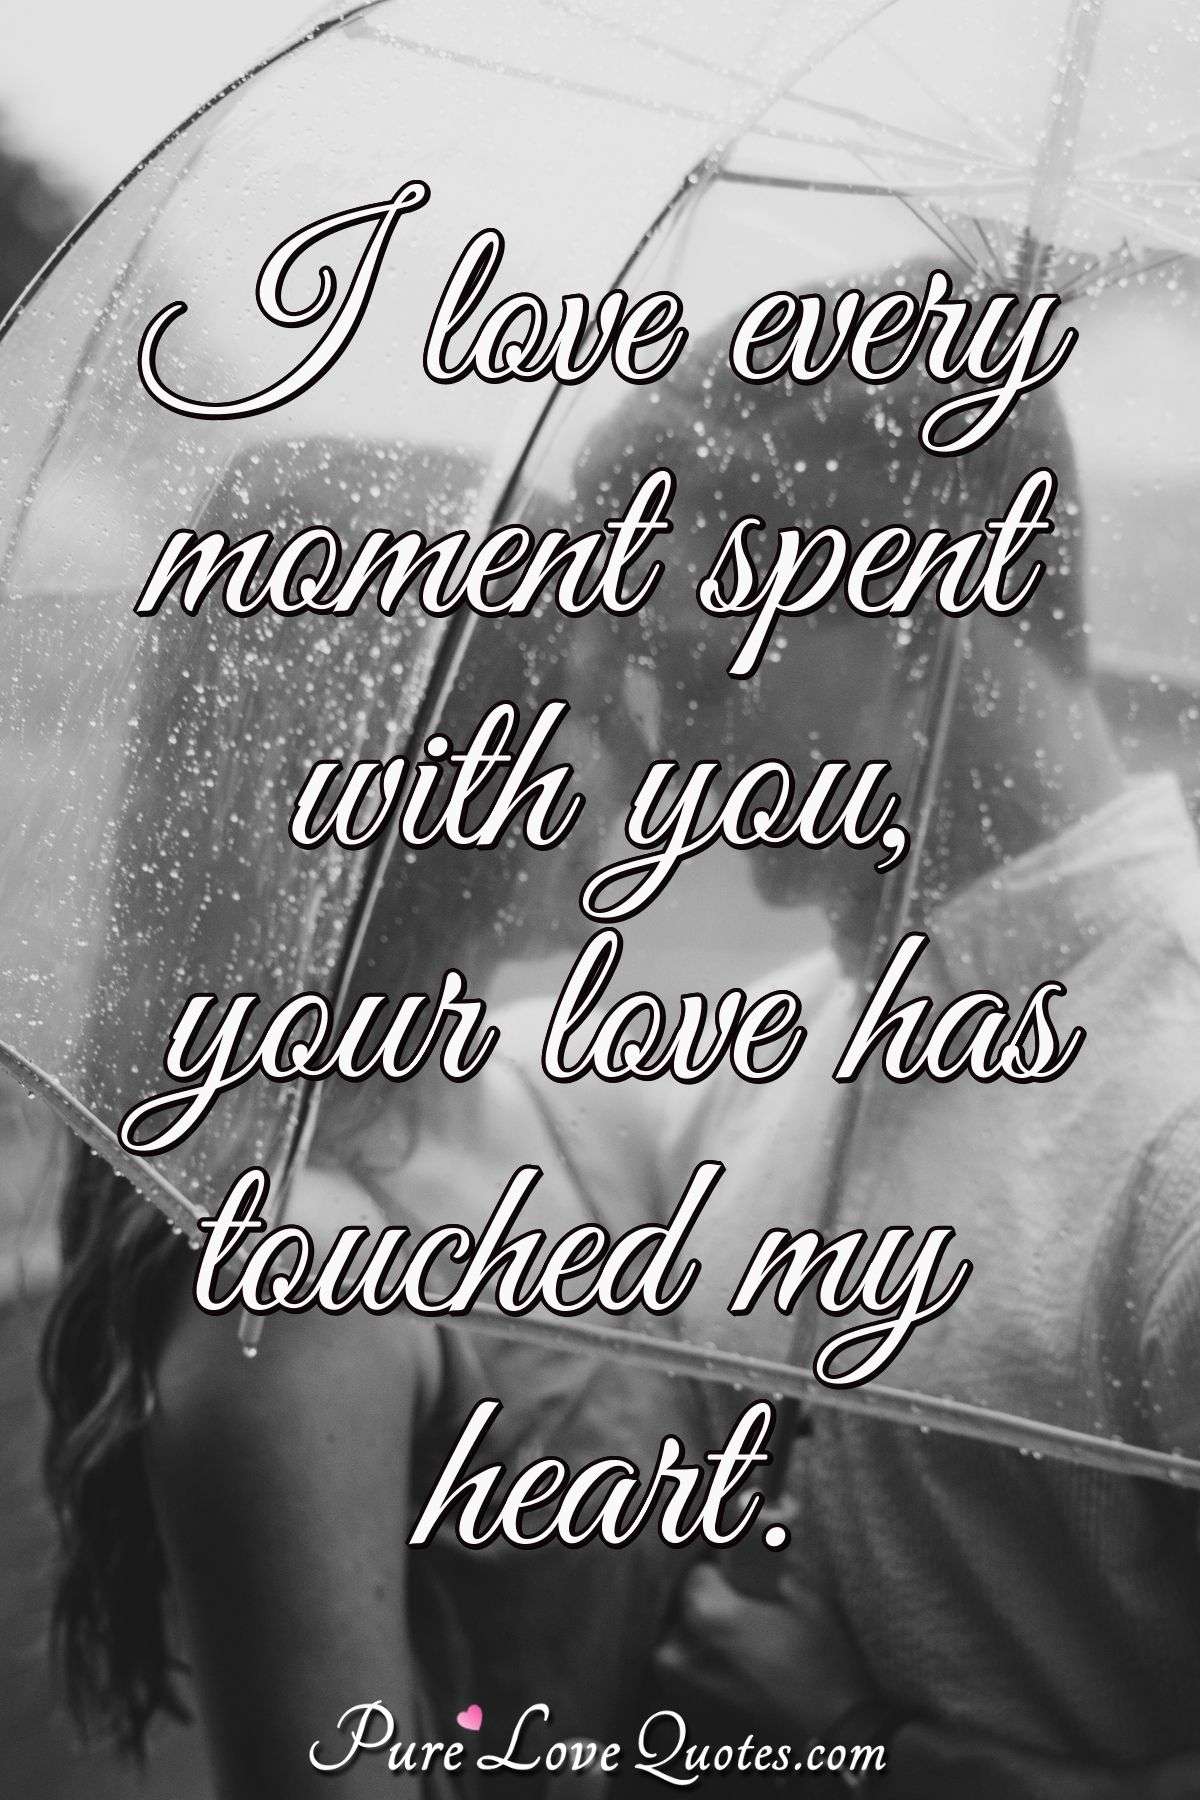 https://www.purelovequotes.com/images/quotes/1200/i-love-every-moment-spent-with-you-purelovequotes.jpg